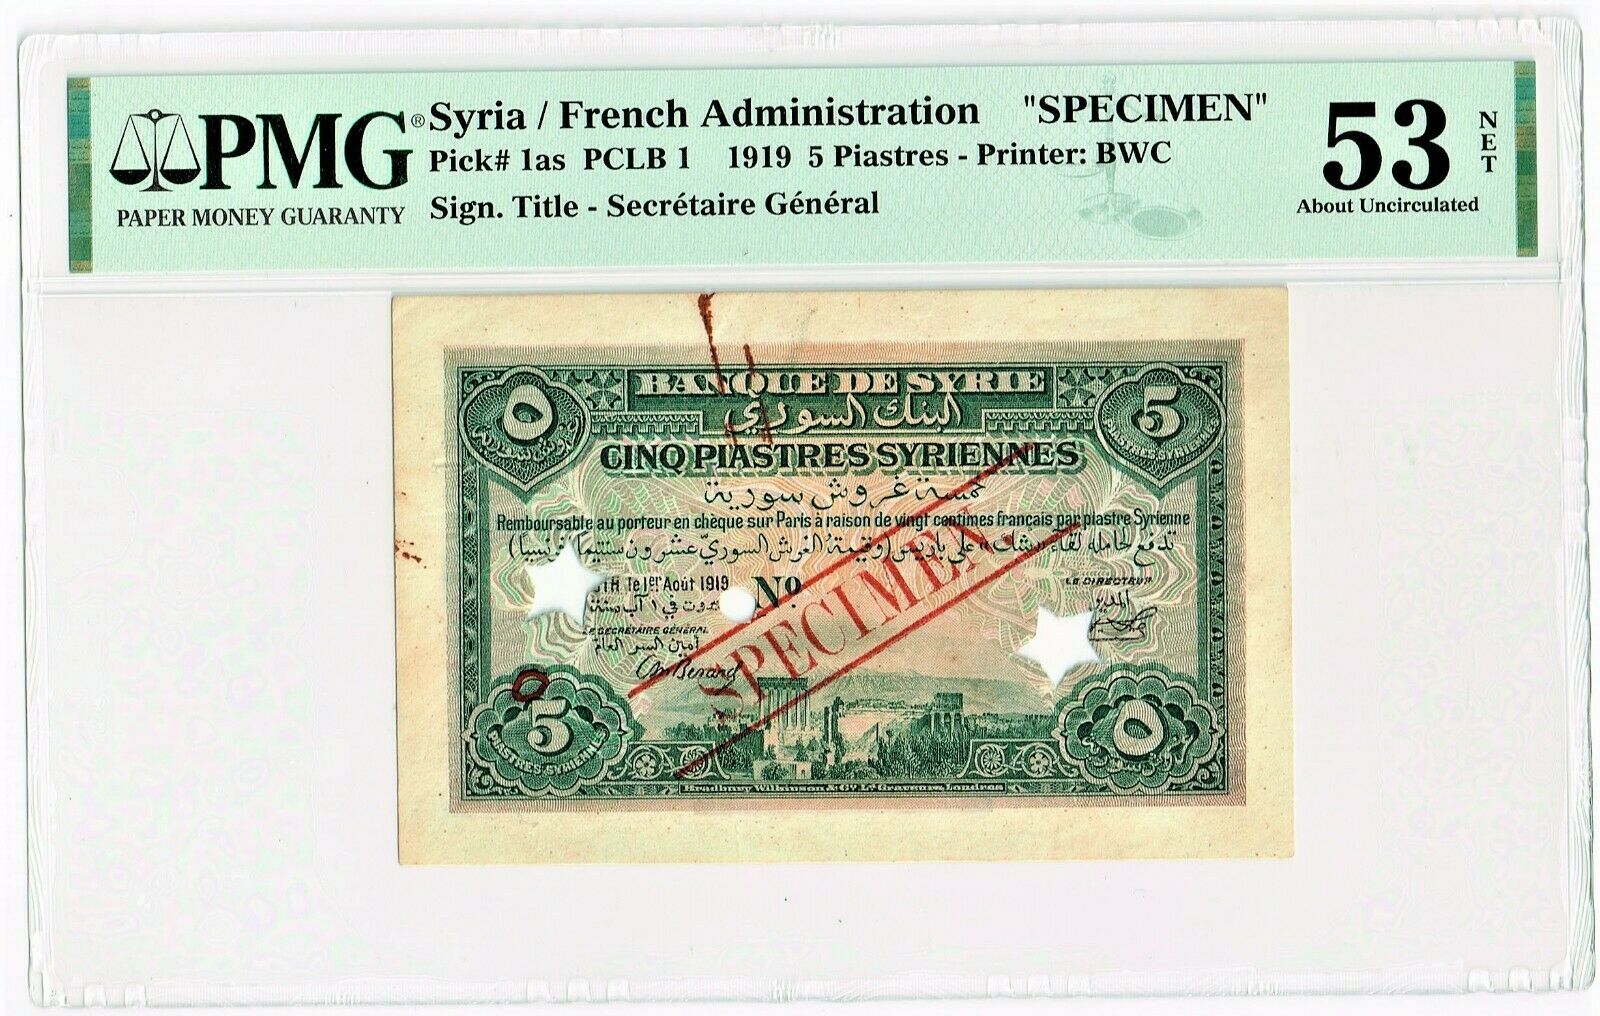 Syria: 5 Piastres 1919 Pick 1as Specimen Pmg About Uncirculated 53 Net.